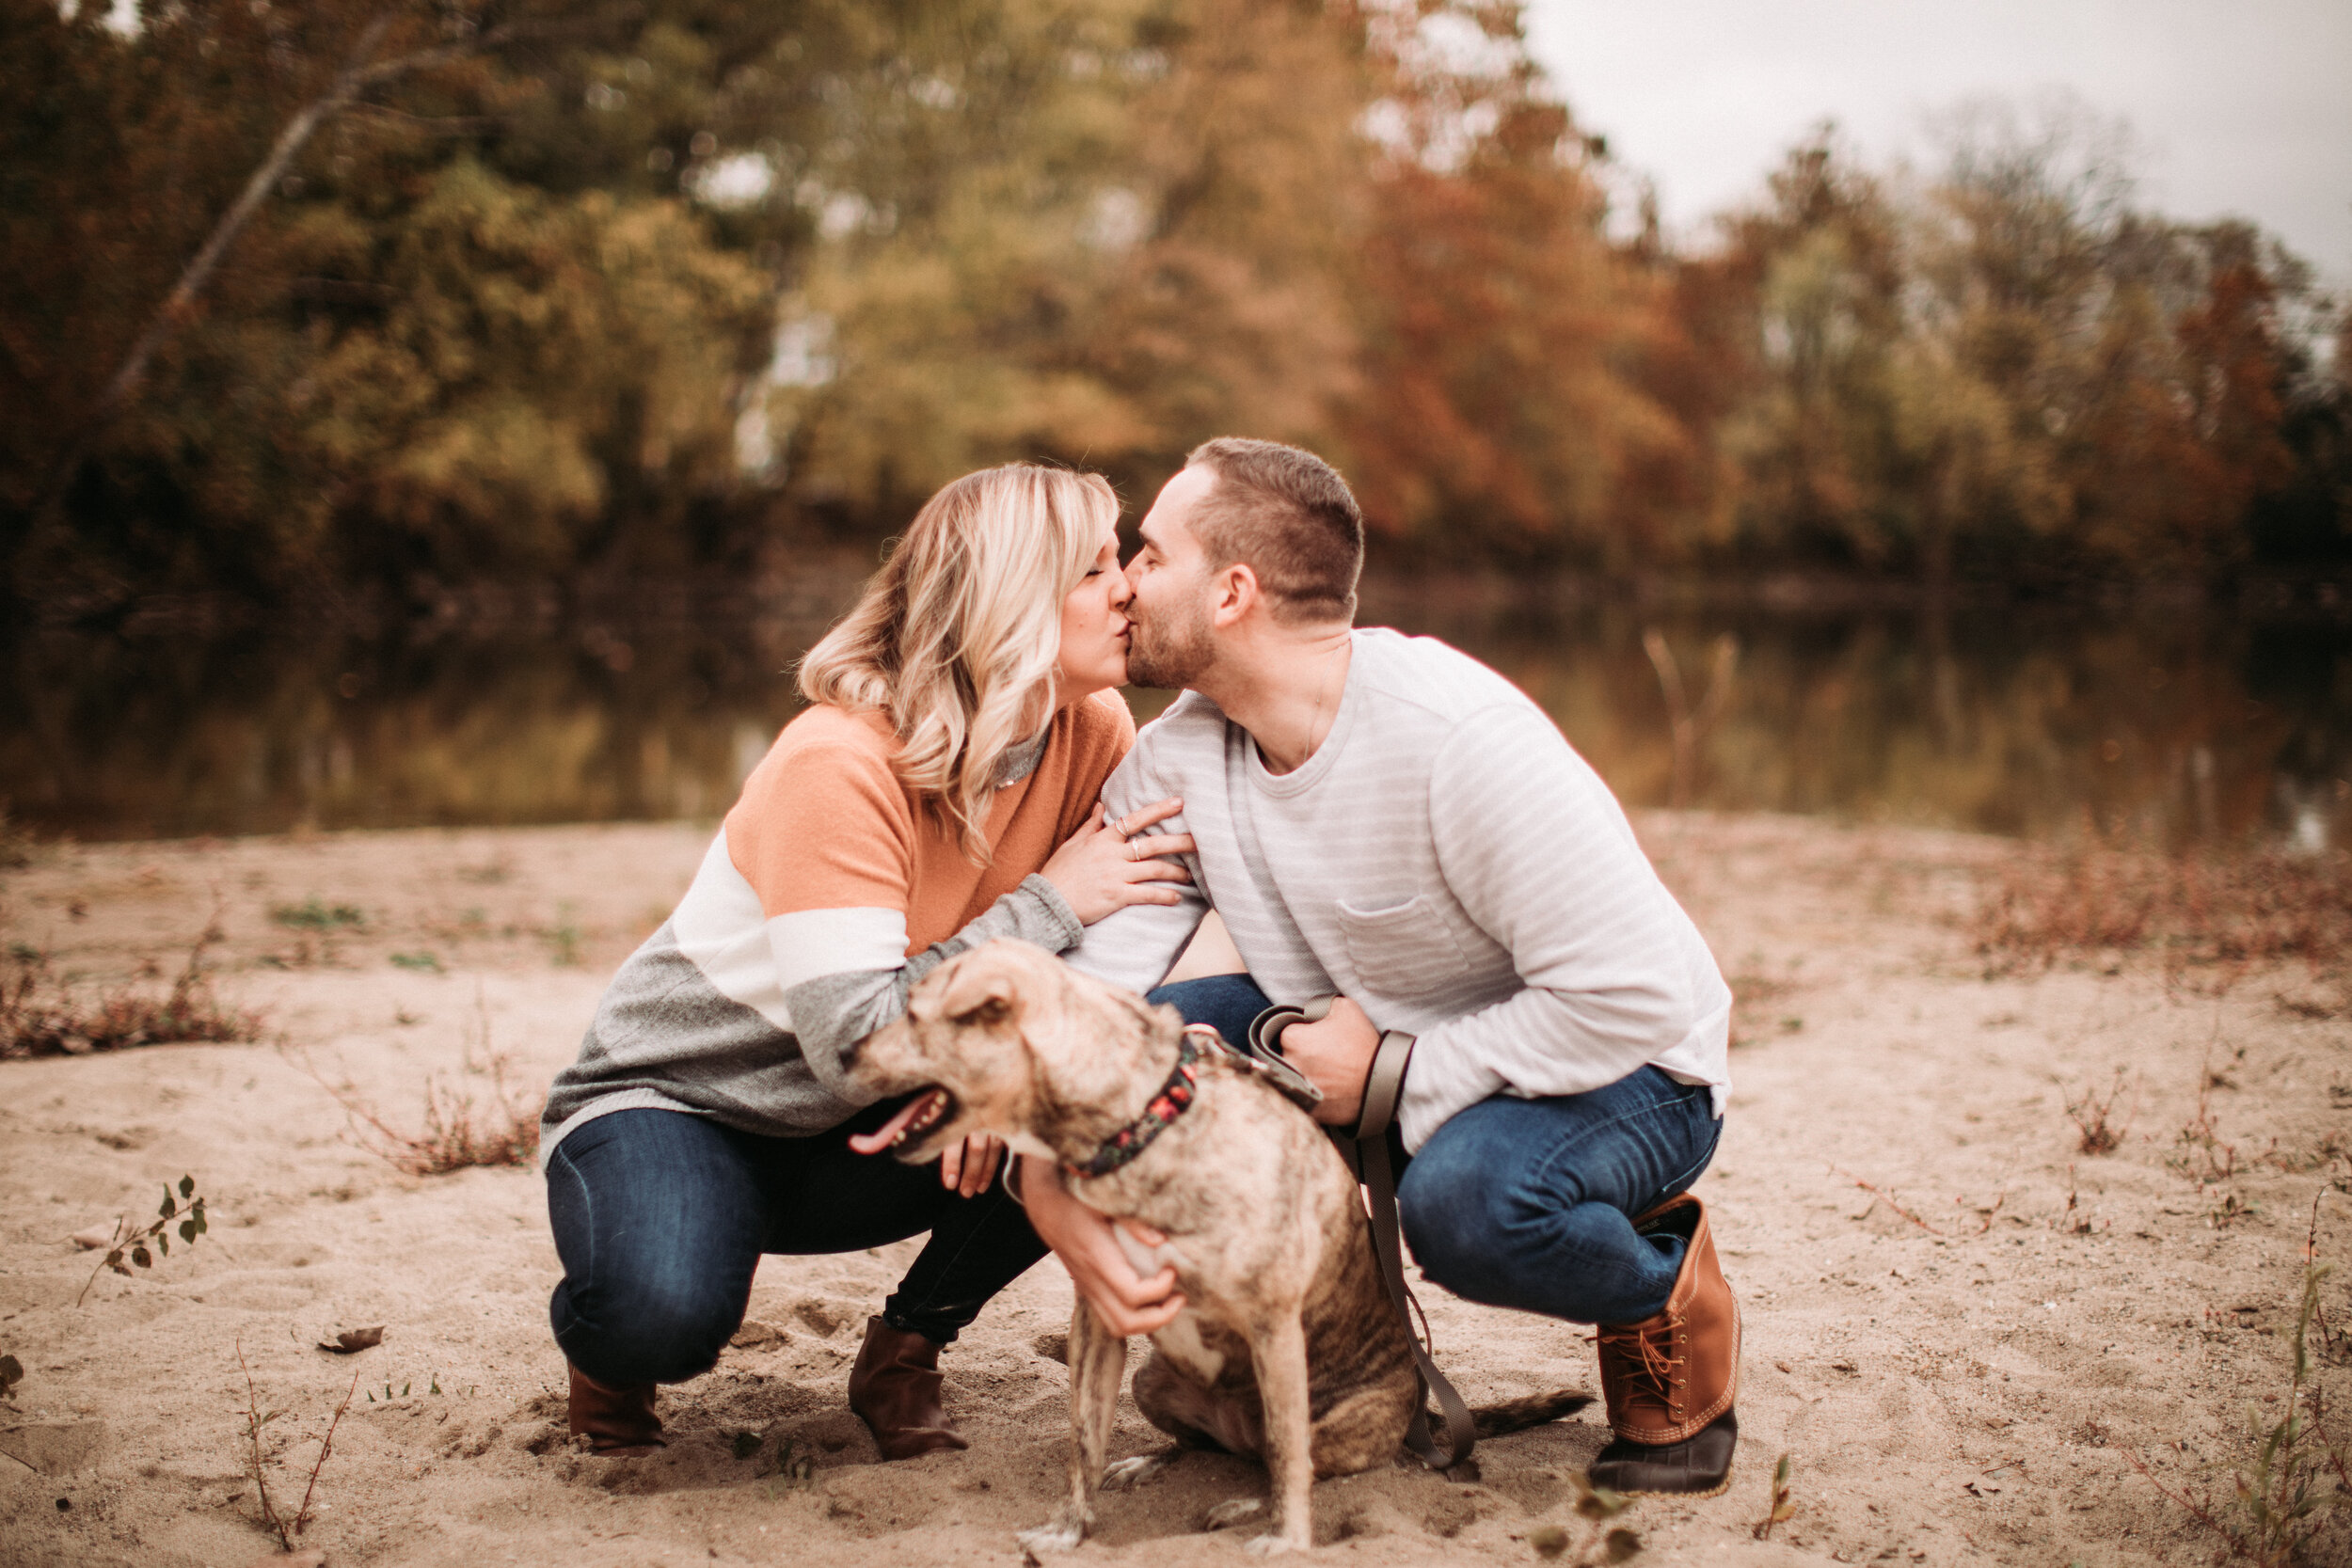 Souther Indiana Fall Engagement Session-2.jpg